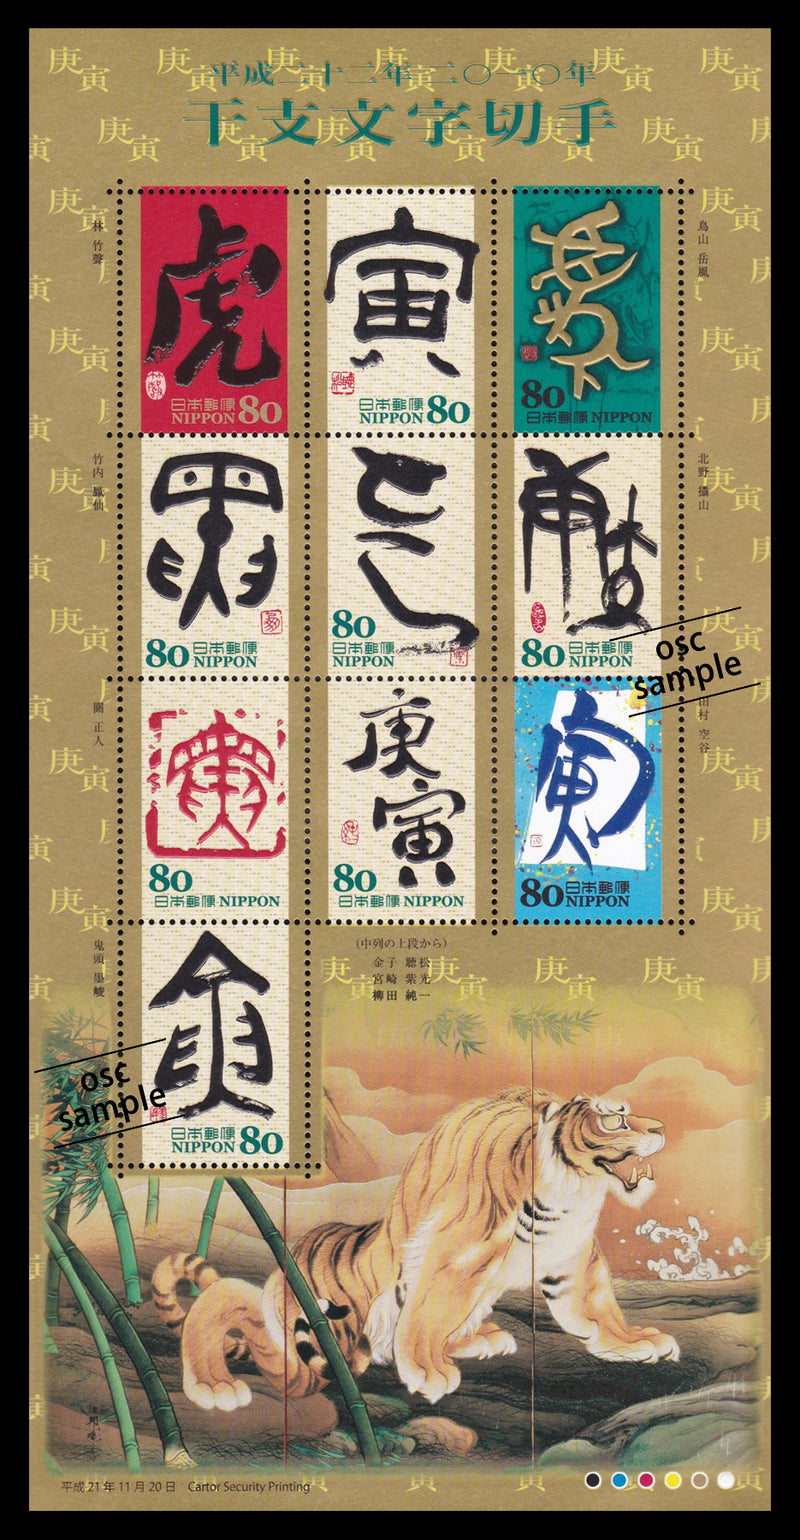 Year of the Tiger (Chinese zodiac sign Series) 虎年